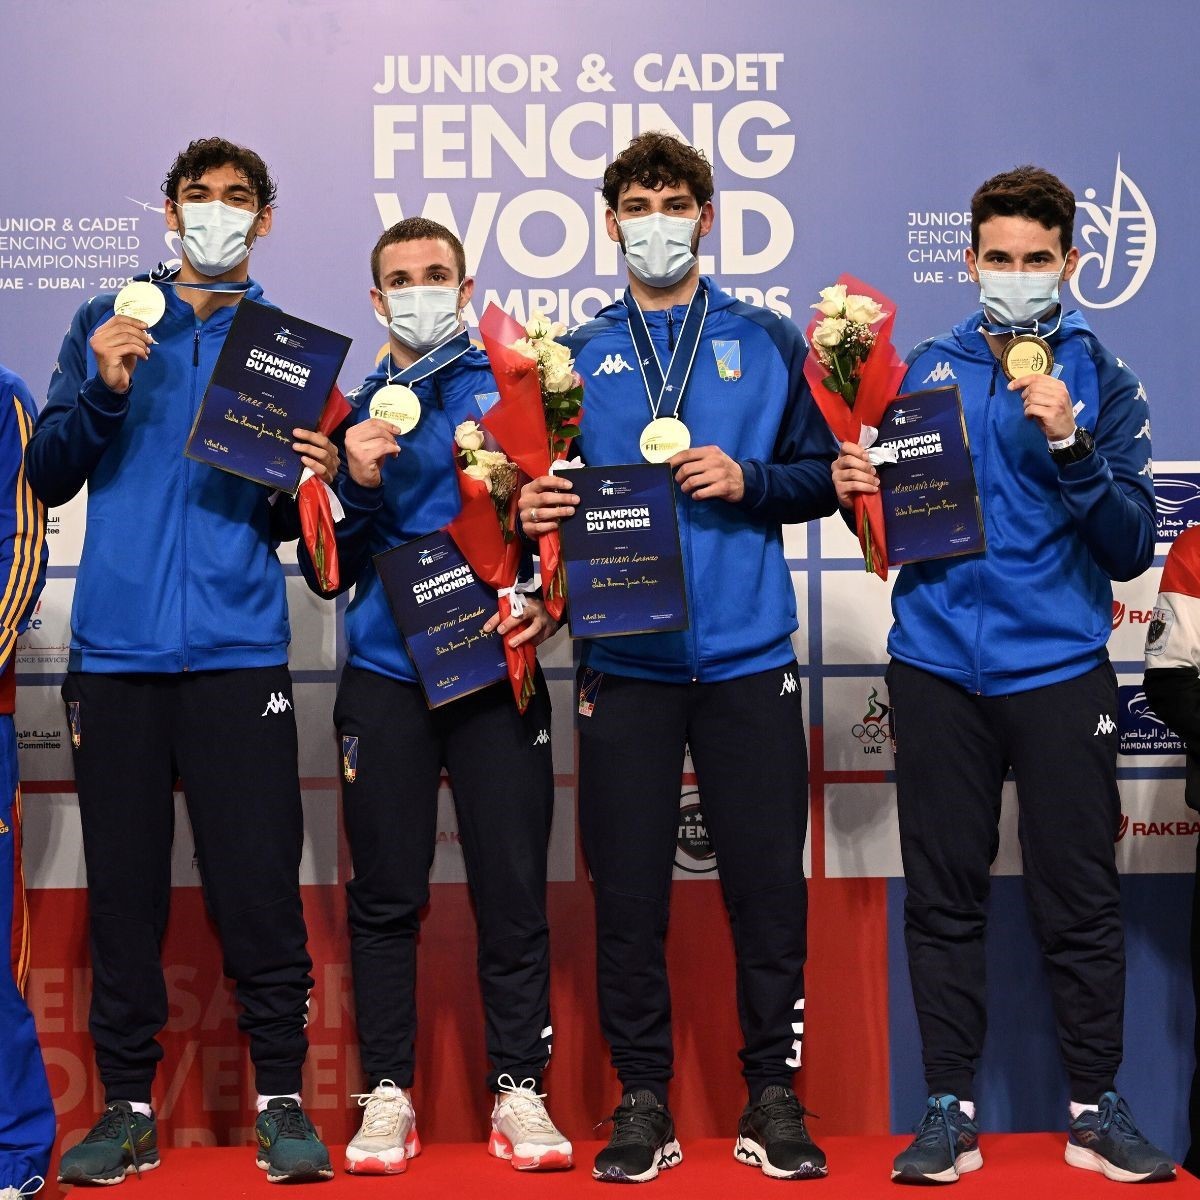 Italy topped the podium in the men's junior sabre team competition at the FIE Junior and Cadet Fencing World Championships ©FIE